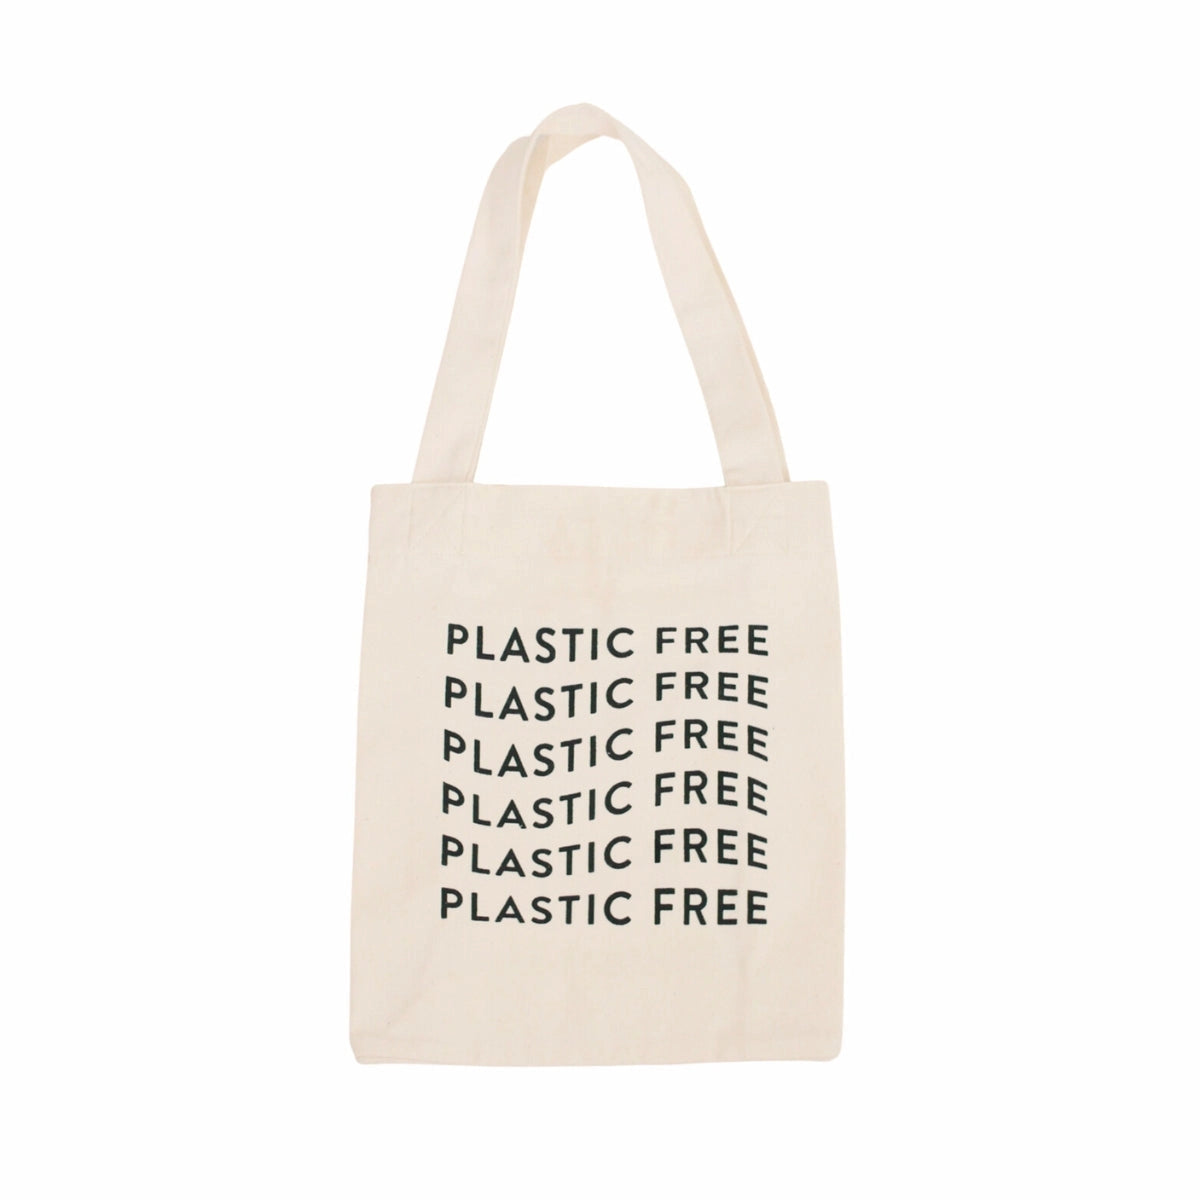 plastic free / shop sustainable tote